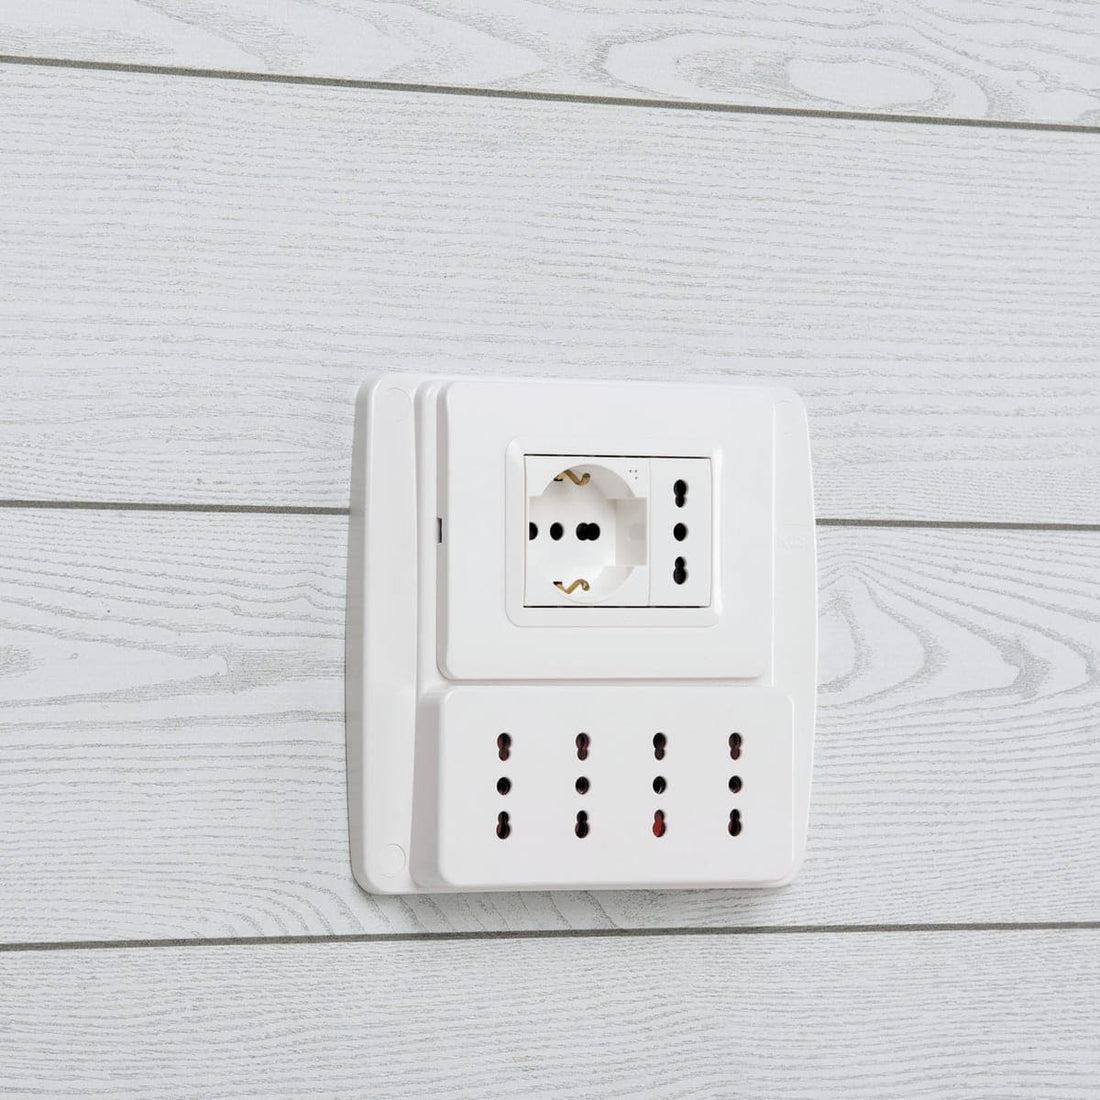 EMILIA SMART WALL SOCKET 4 SOCKETS 10/16A SUITABLE FOR 3-PIN BOX WHITE - best price from Maltashopper.com BR420003804